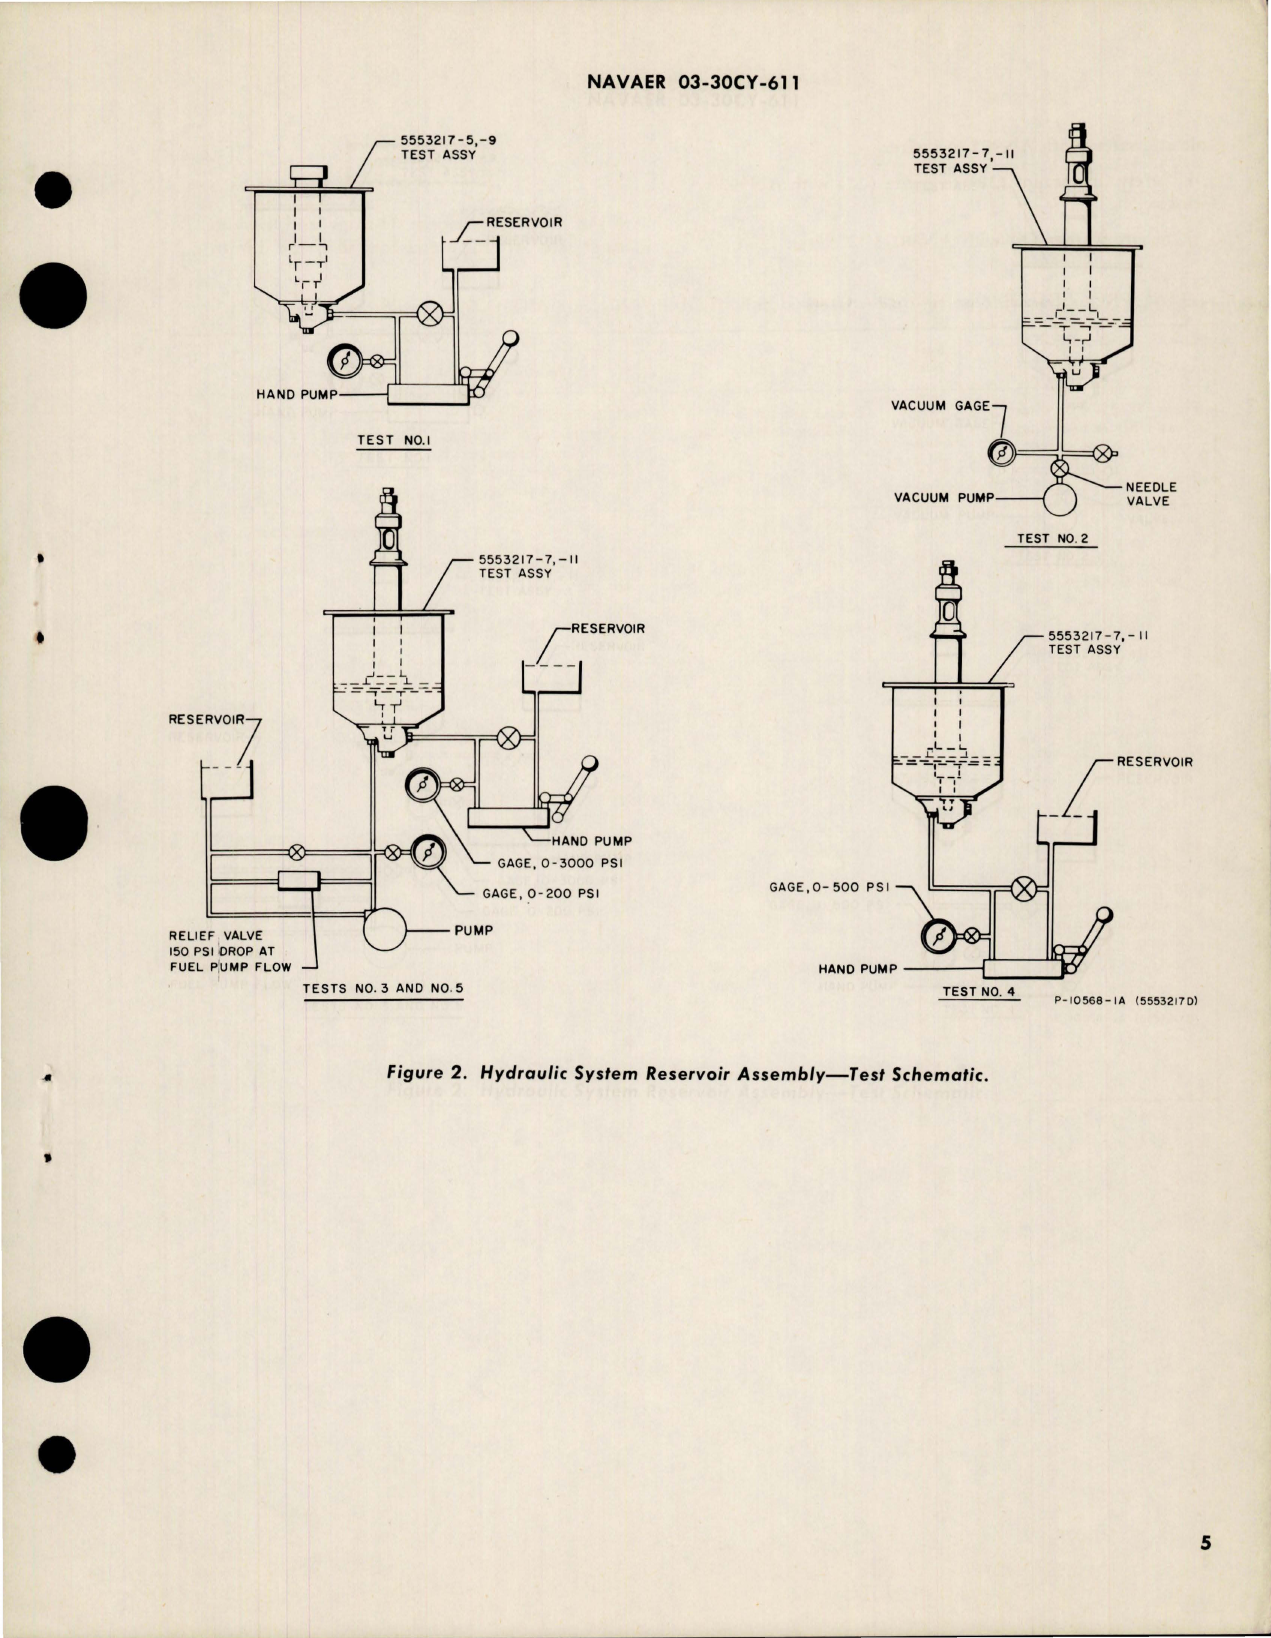 Sample page 5 from AirCorps Library document: Overhaul Instructions with Parts Breakdown for Hydraulic System Reservoir Assembly - 5553217 and 5553217-503